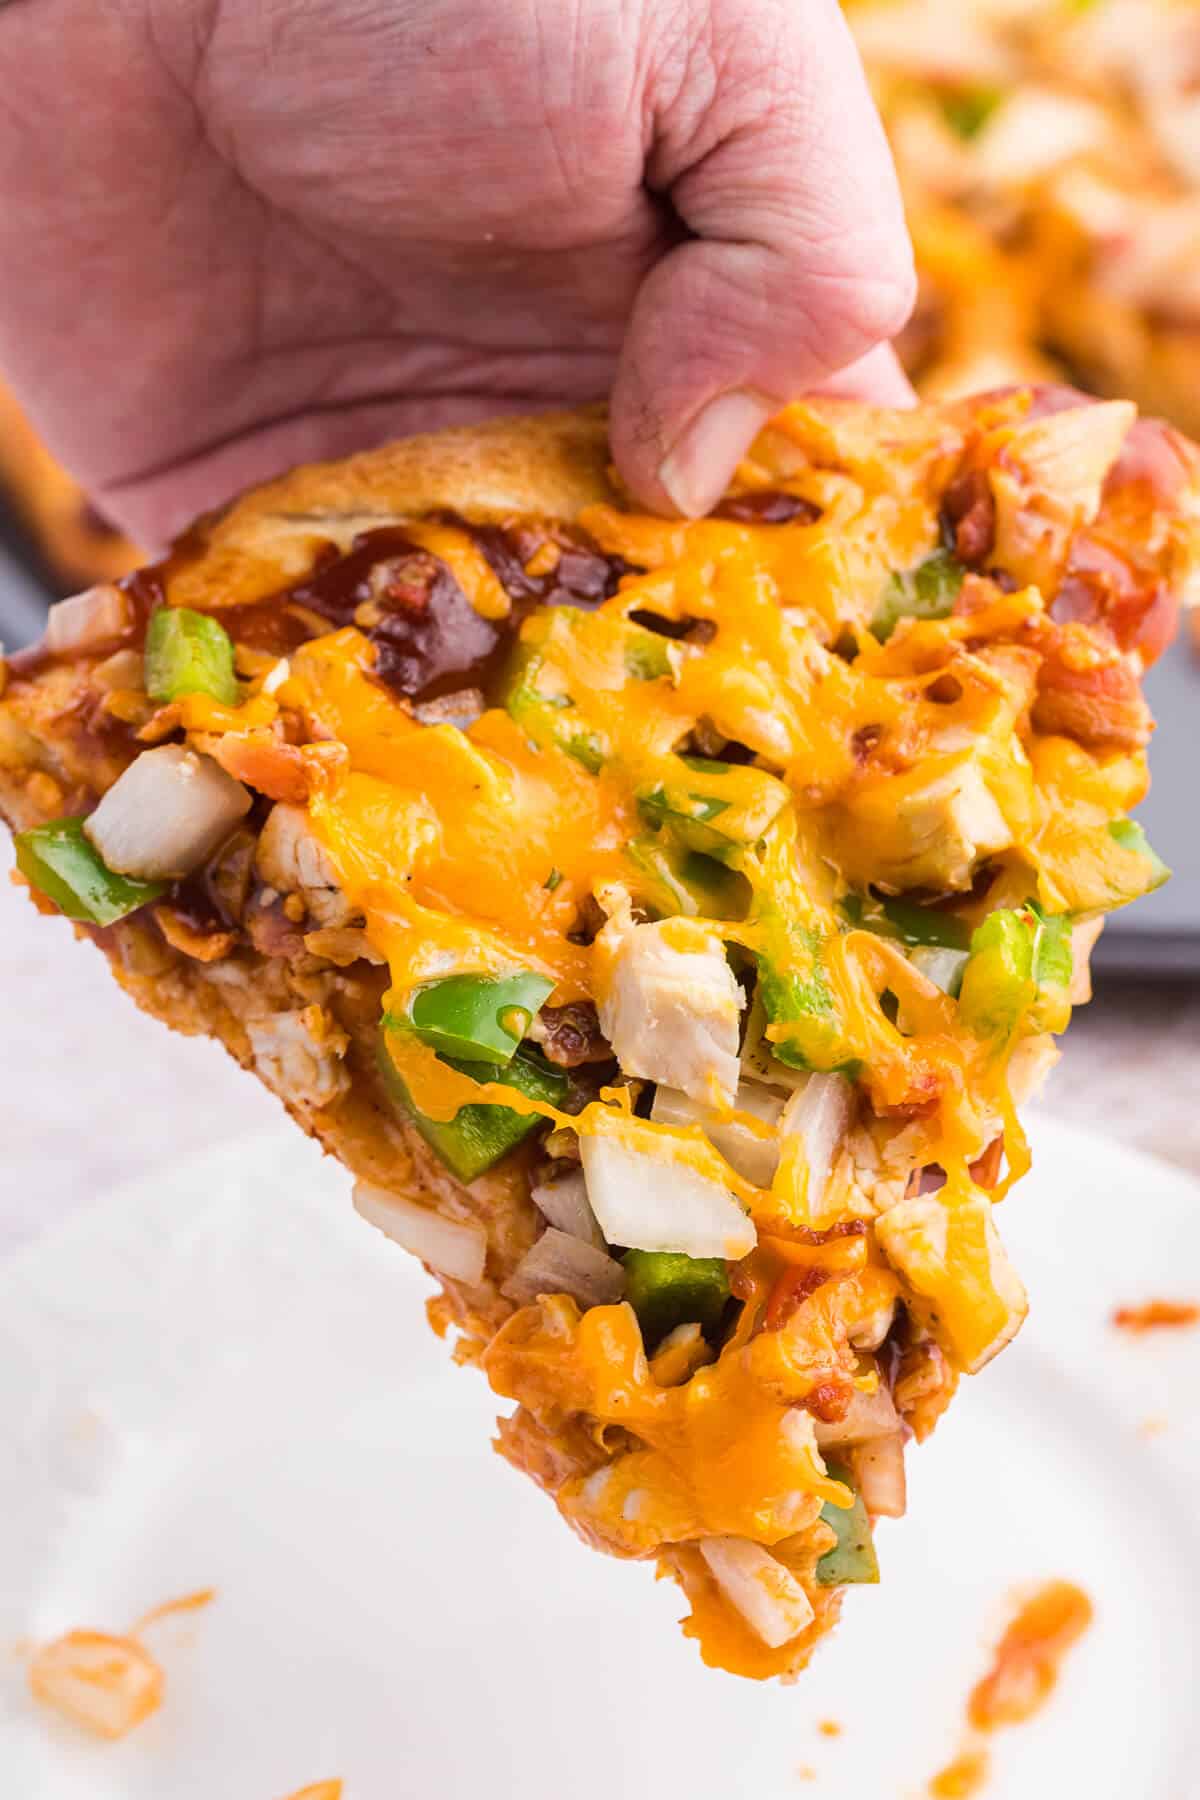 A hand holding a slice of BBQ Chicken Pizza.